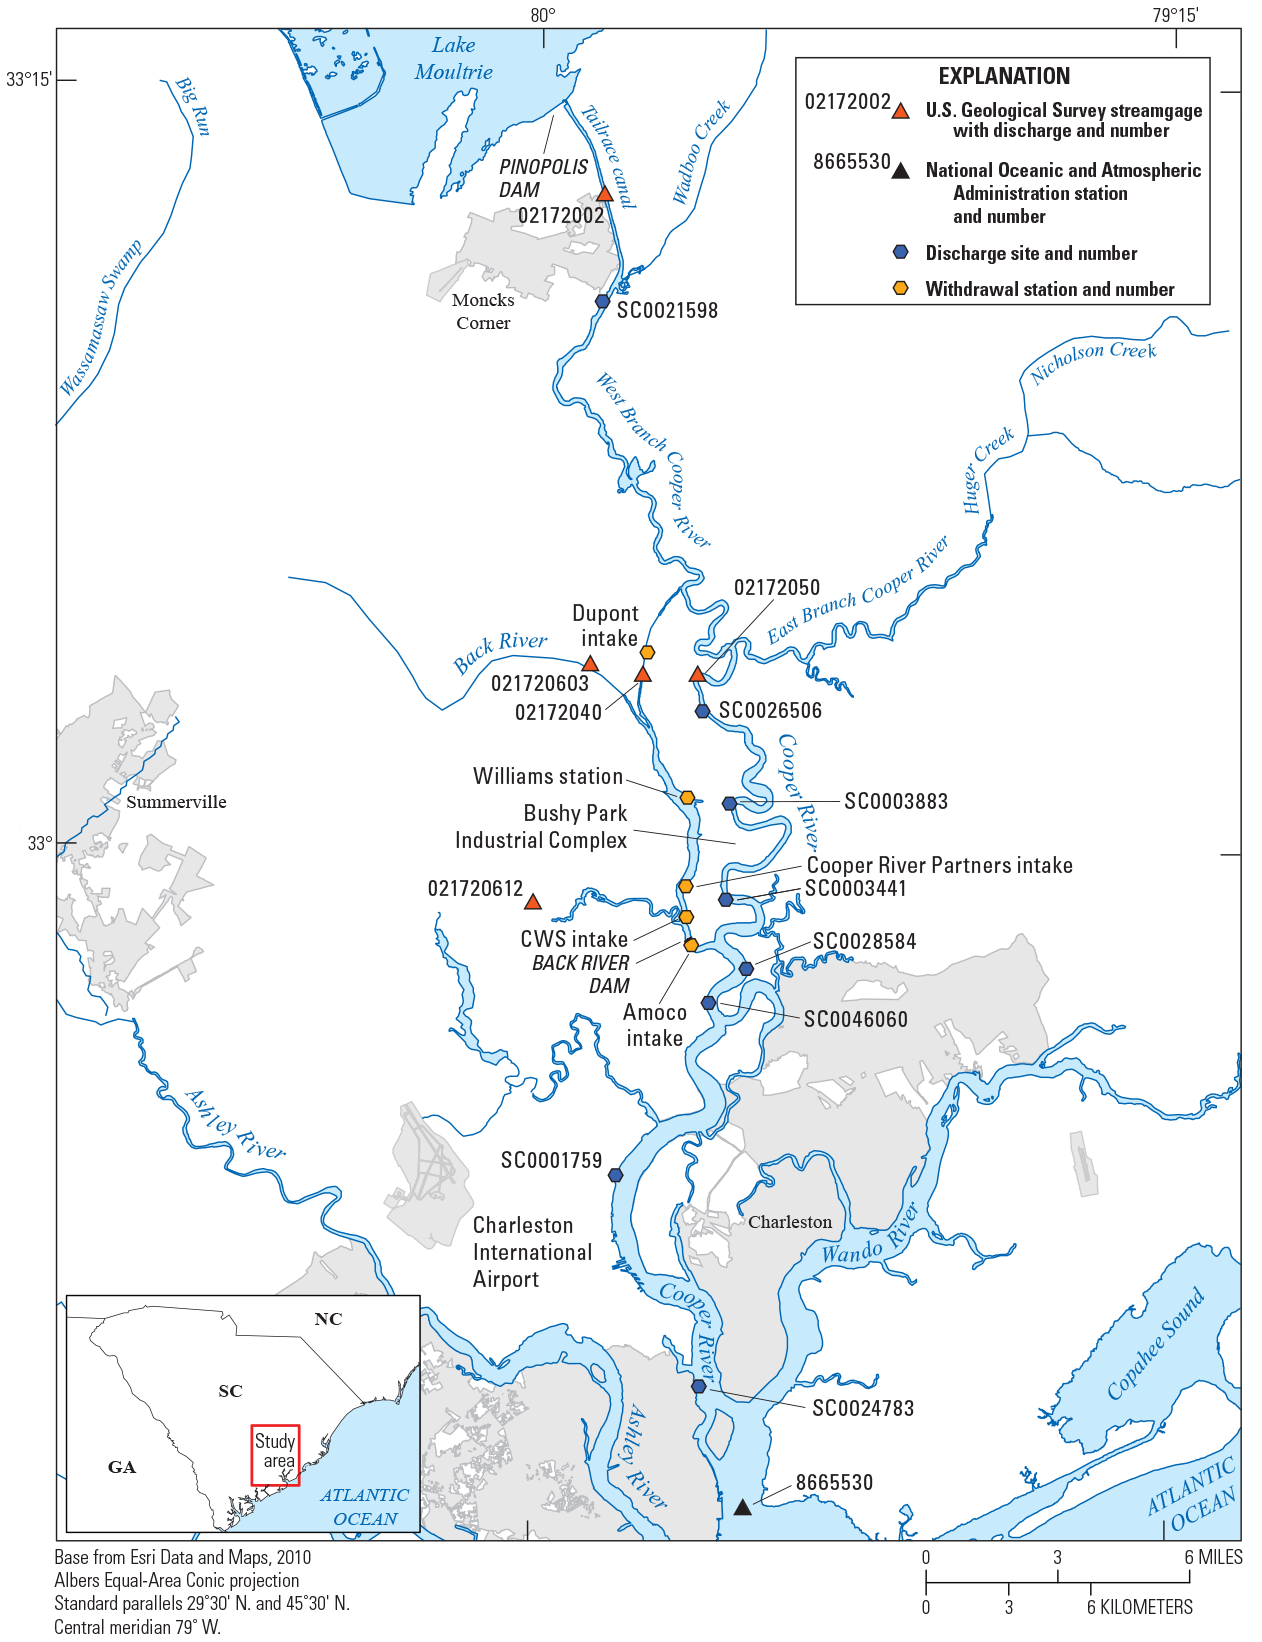 Map with symbols for streamgages, discharge sites, and withdrawal stations in study
                        area in South Carolina